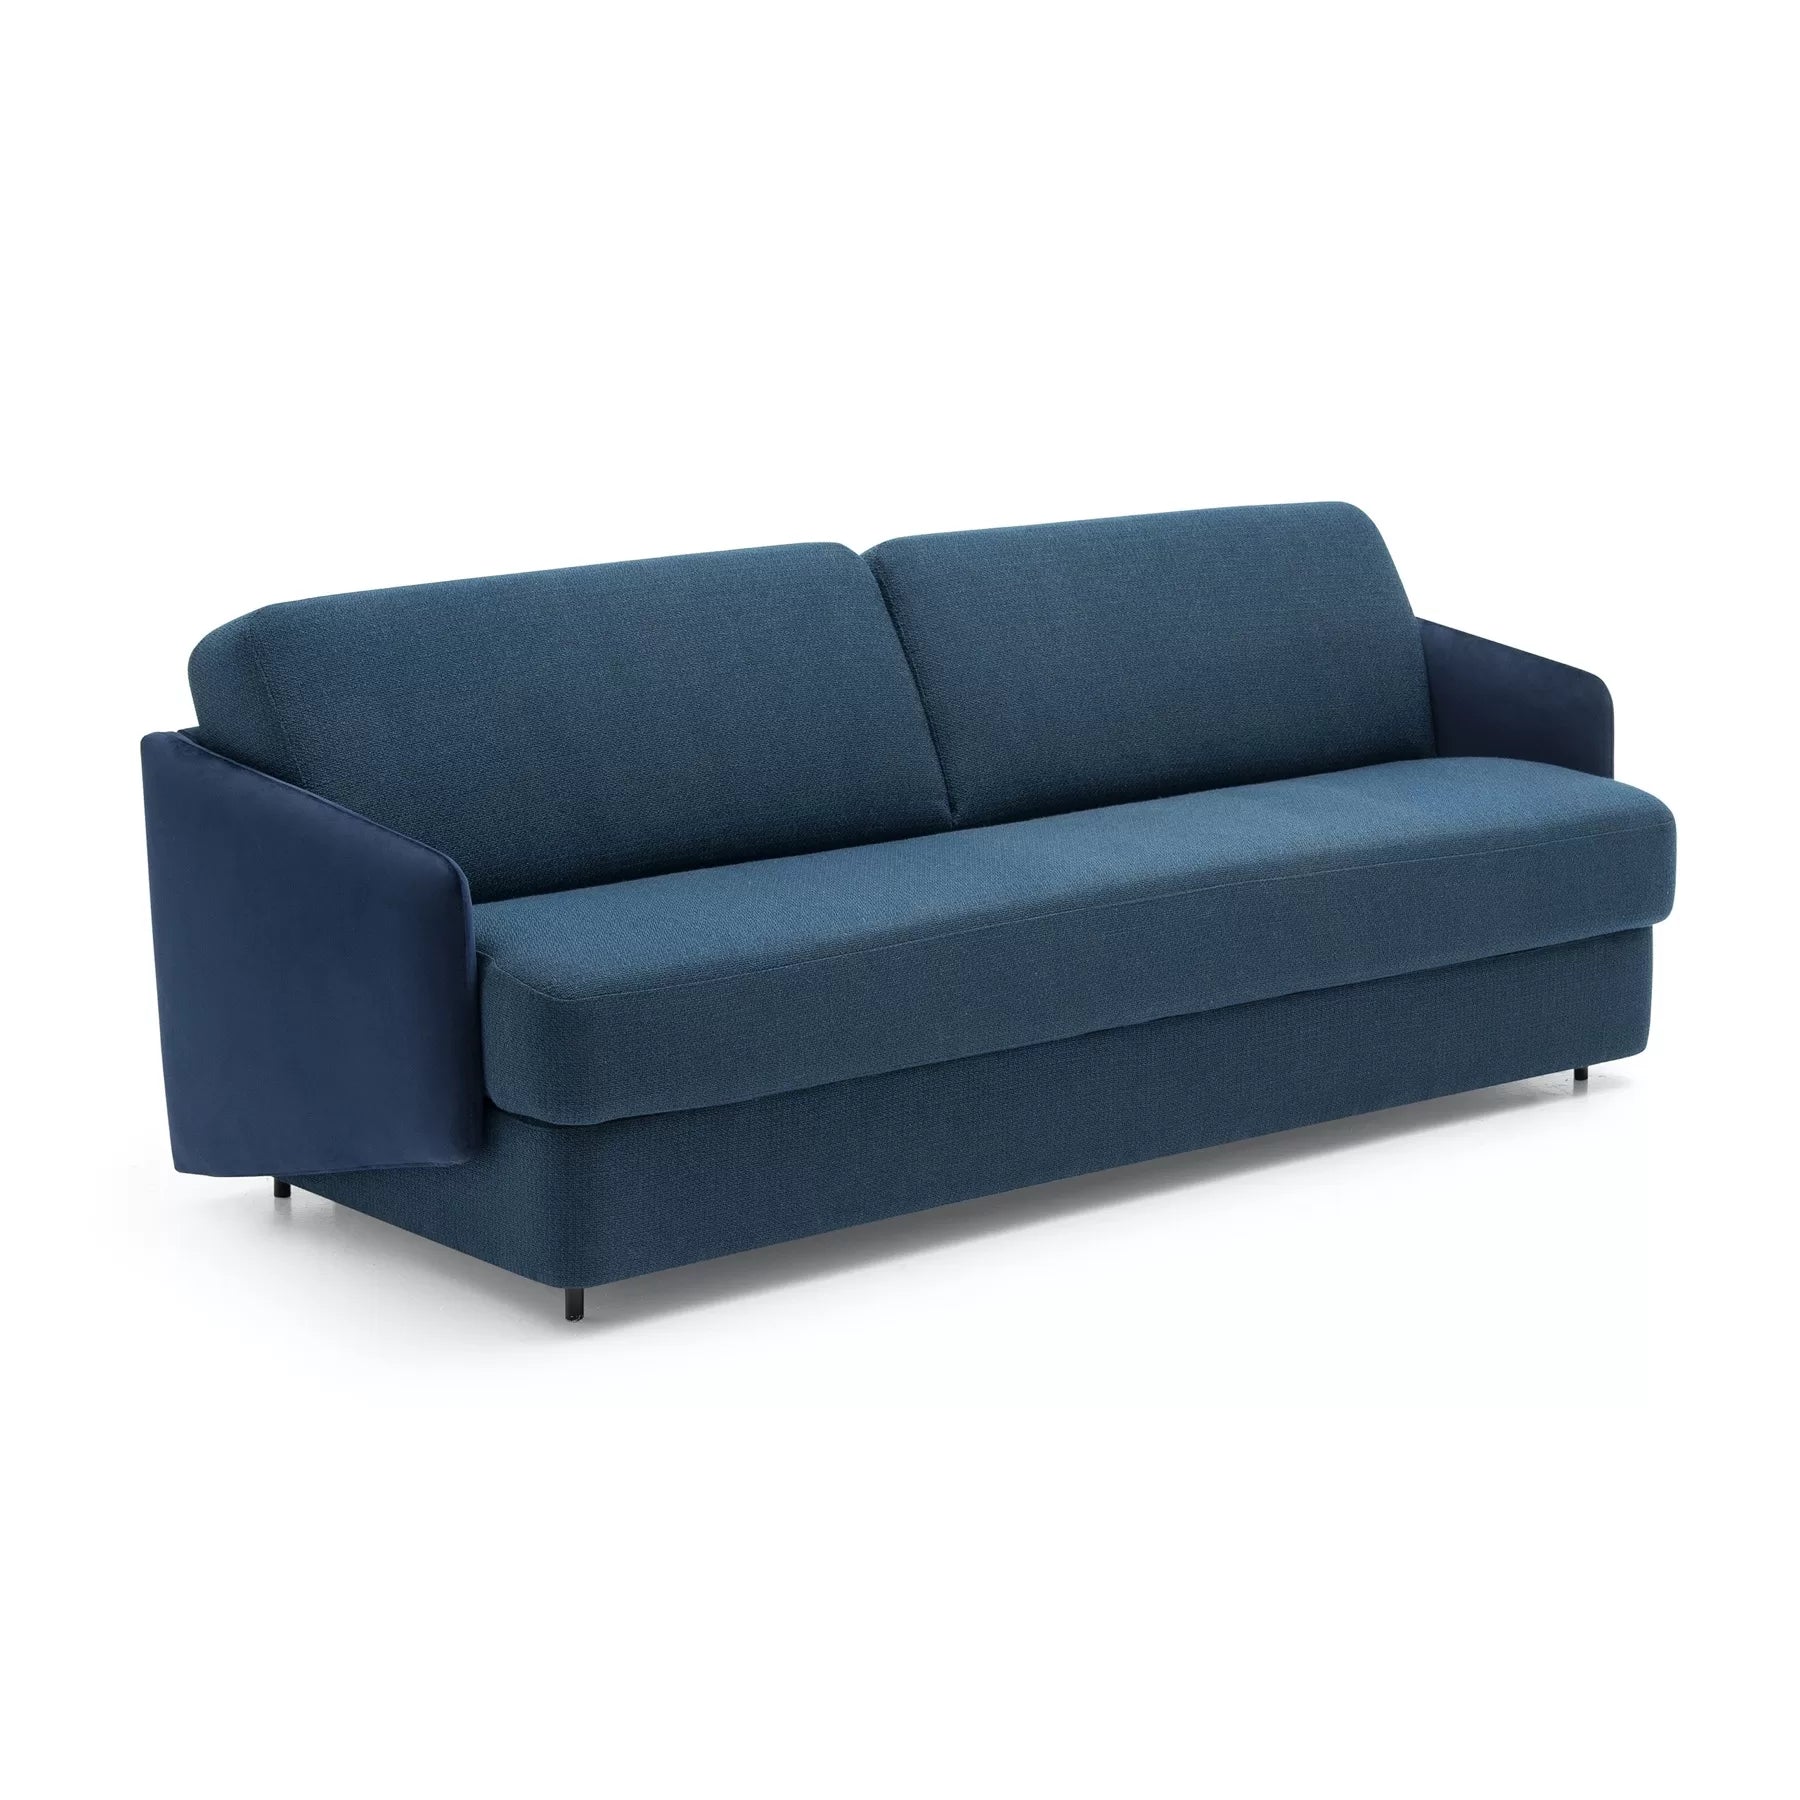 Abra 944 Sofa Bed-TM Leader-Contract Furniture Store